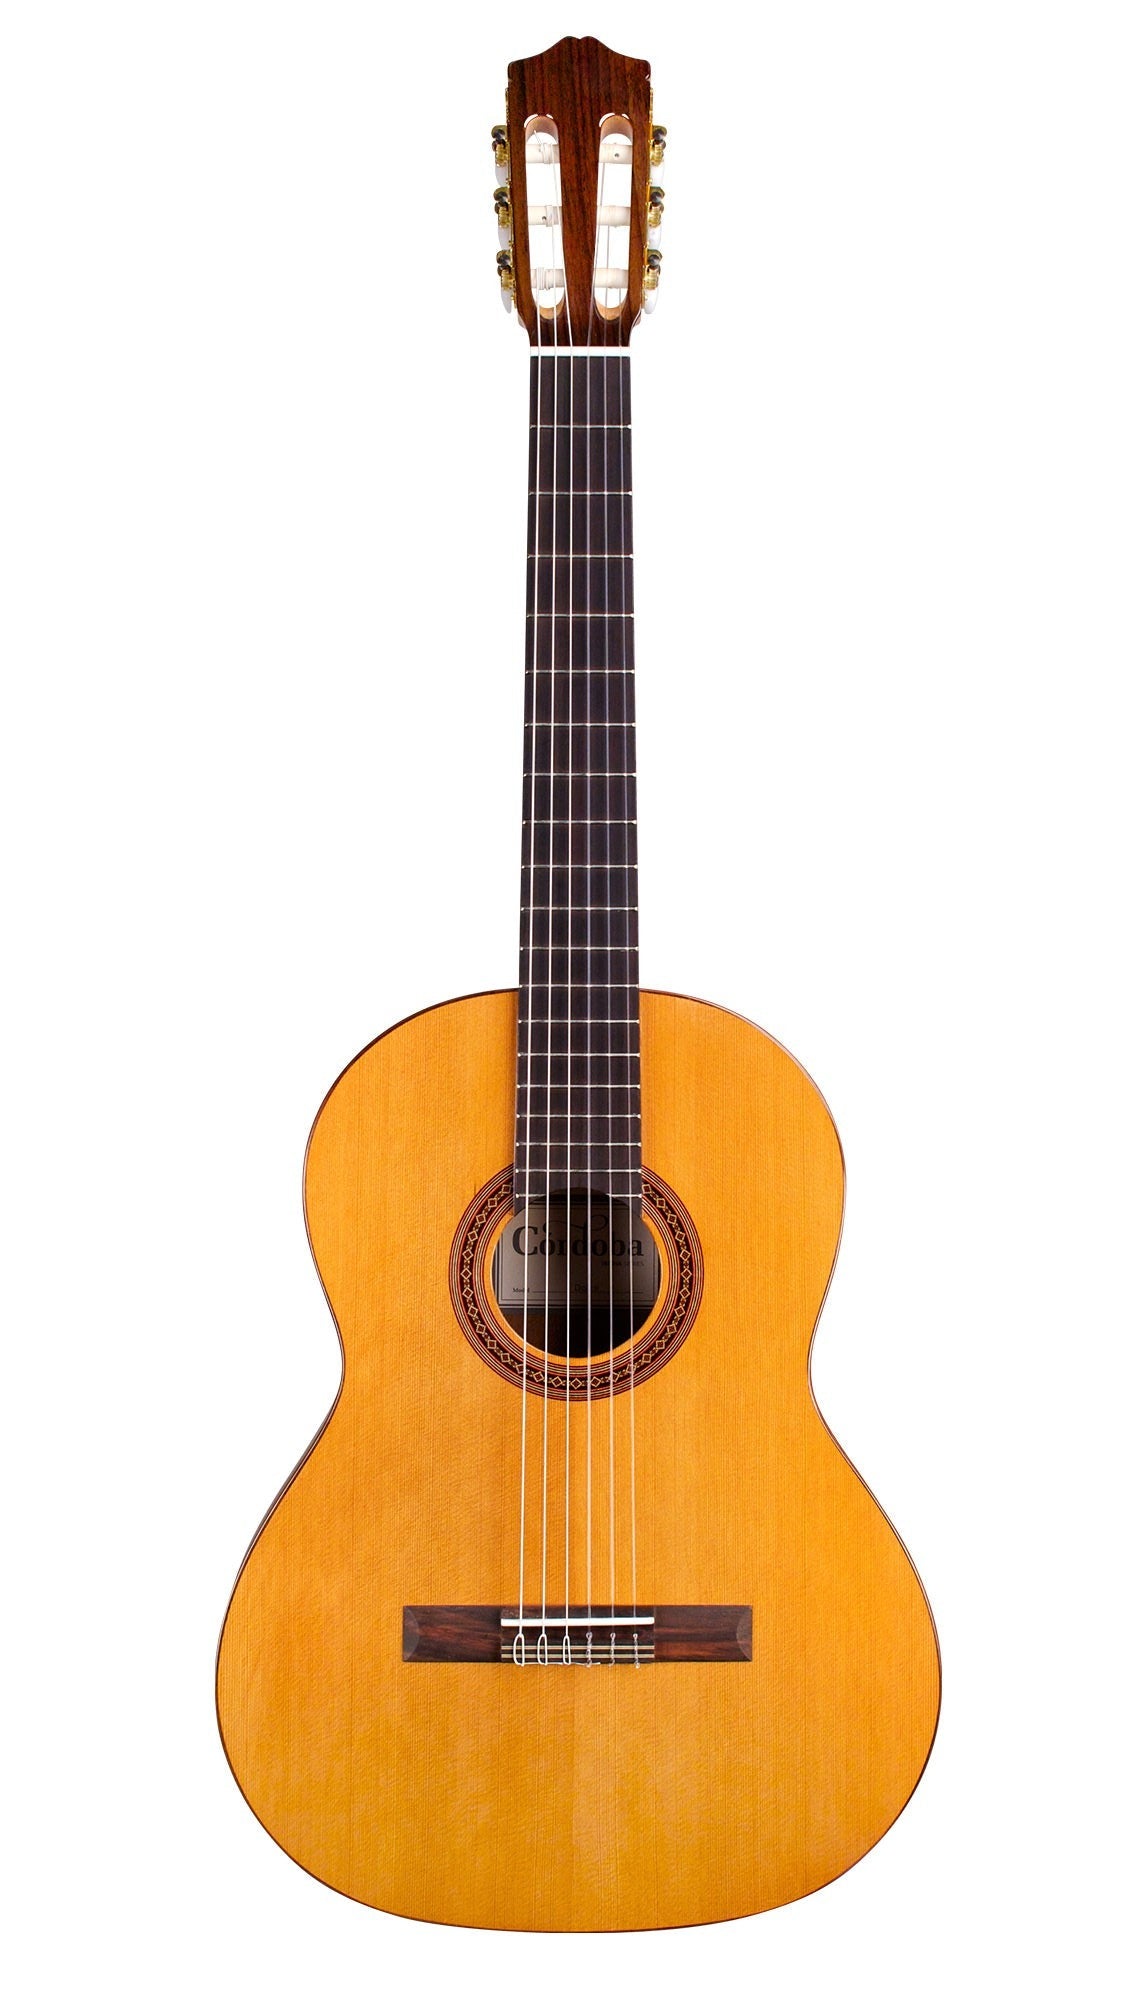 Cordoba Dolce 7/8 Classical Guitar - Solid Canadian Cedar Top, Mahogany Back & Sides, Smallsized & Lightweight Classical Guitar, Best for Traveling